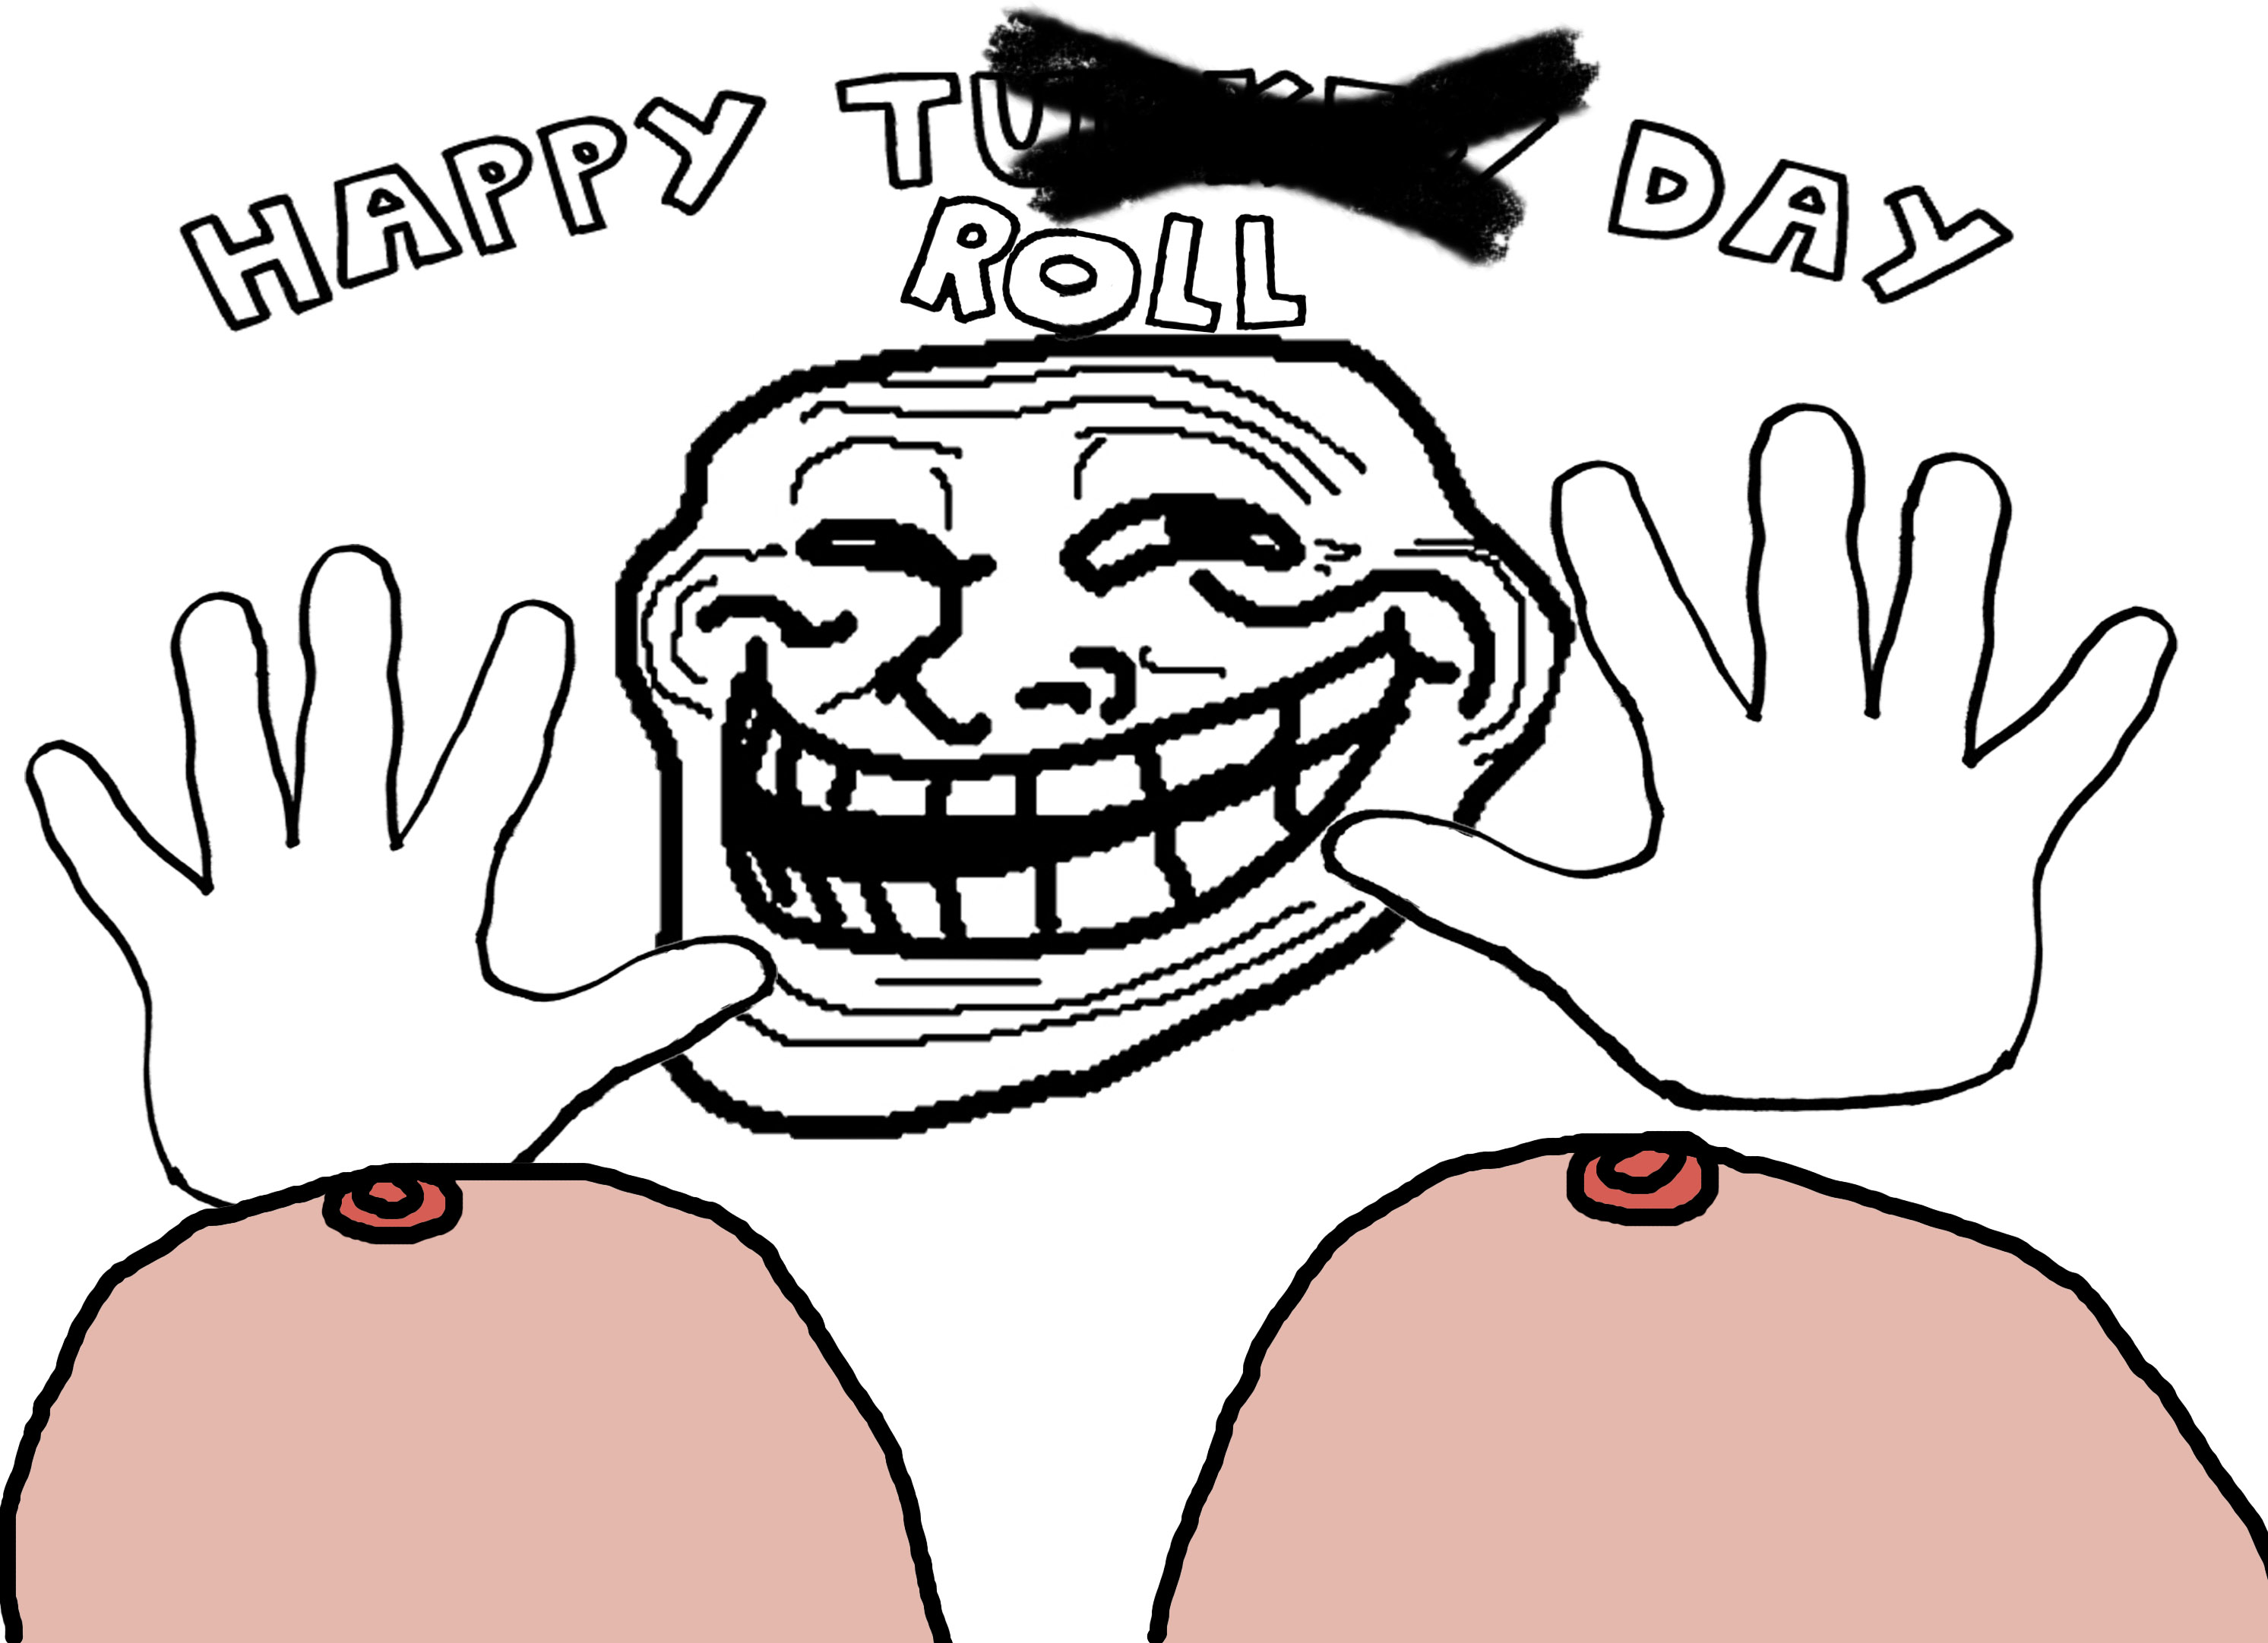 dont believe what you see today is troll day